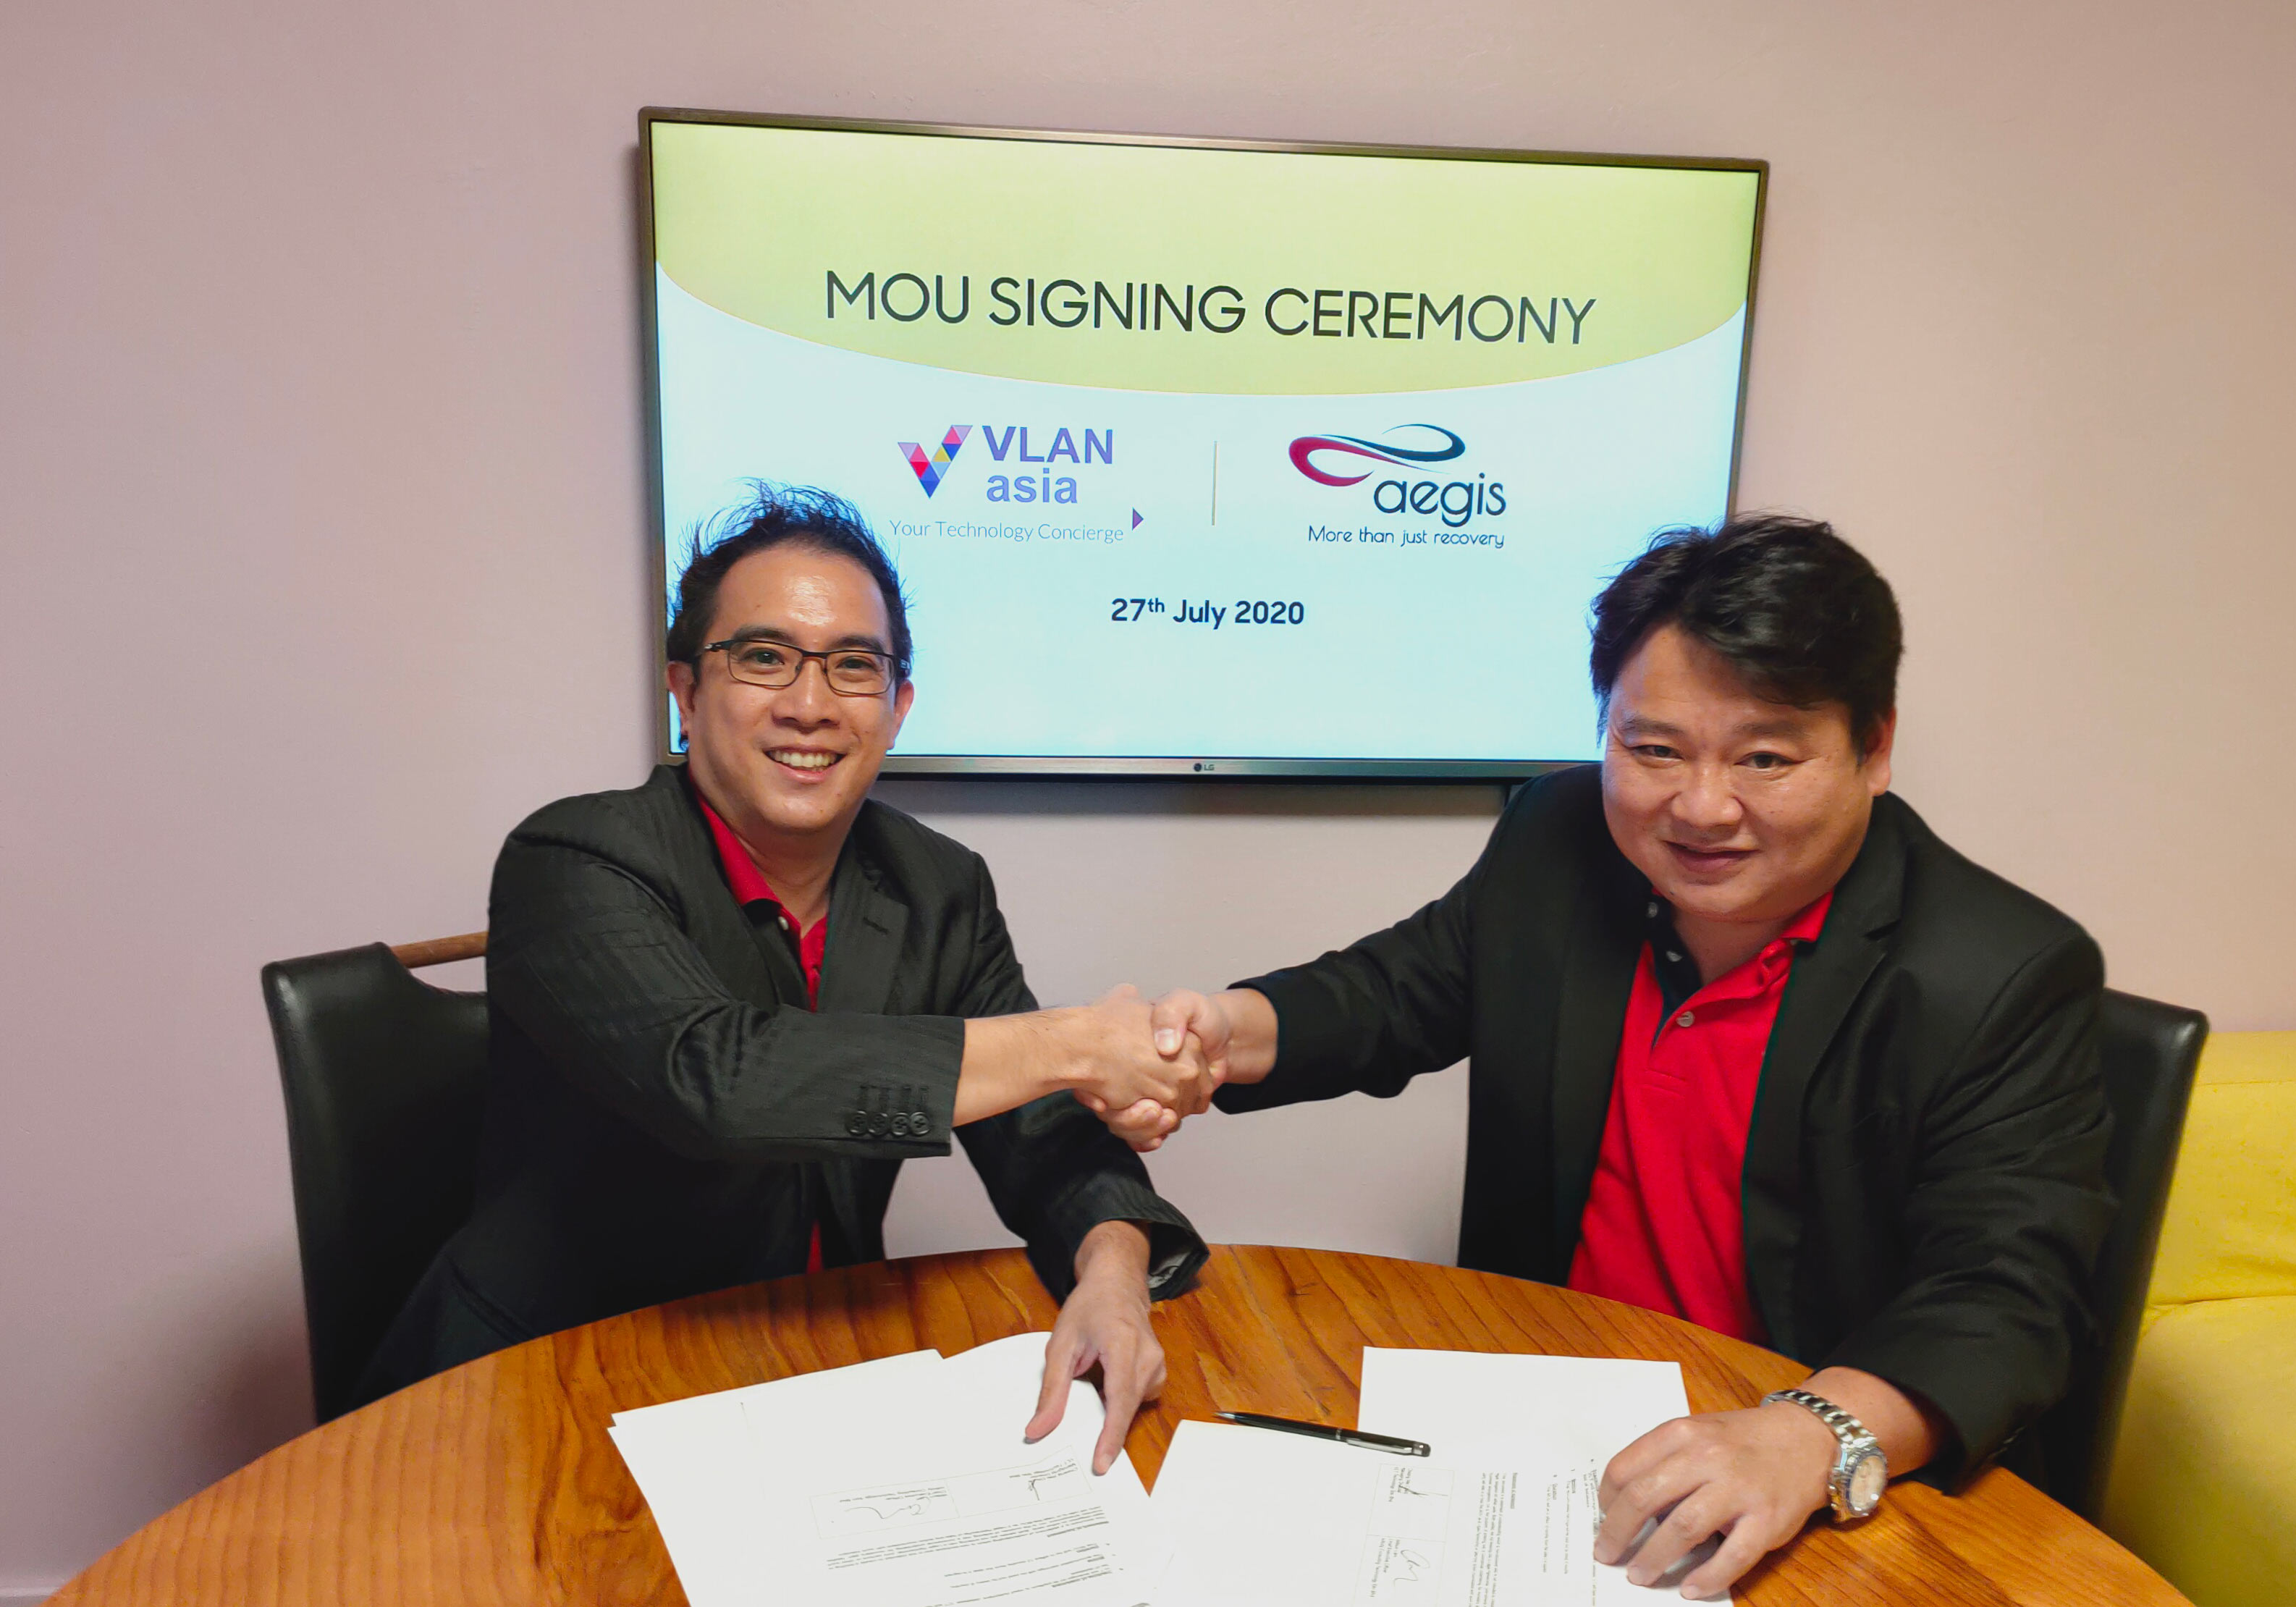 From left, Lance Cheang, Managing Director of VLAN technology Sdn Bhd and Wilson Lam, Chief Executive Officer of Aegis